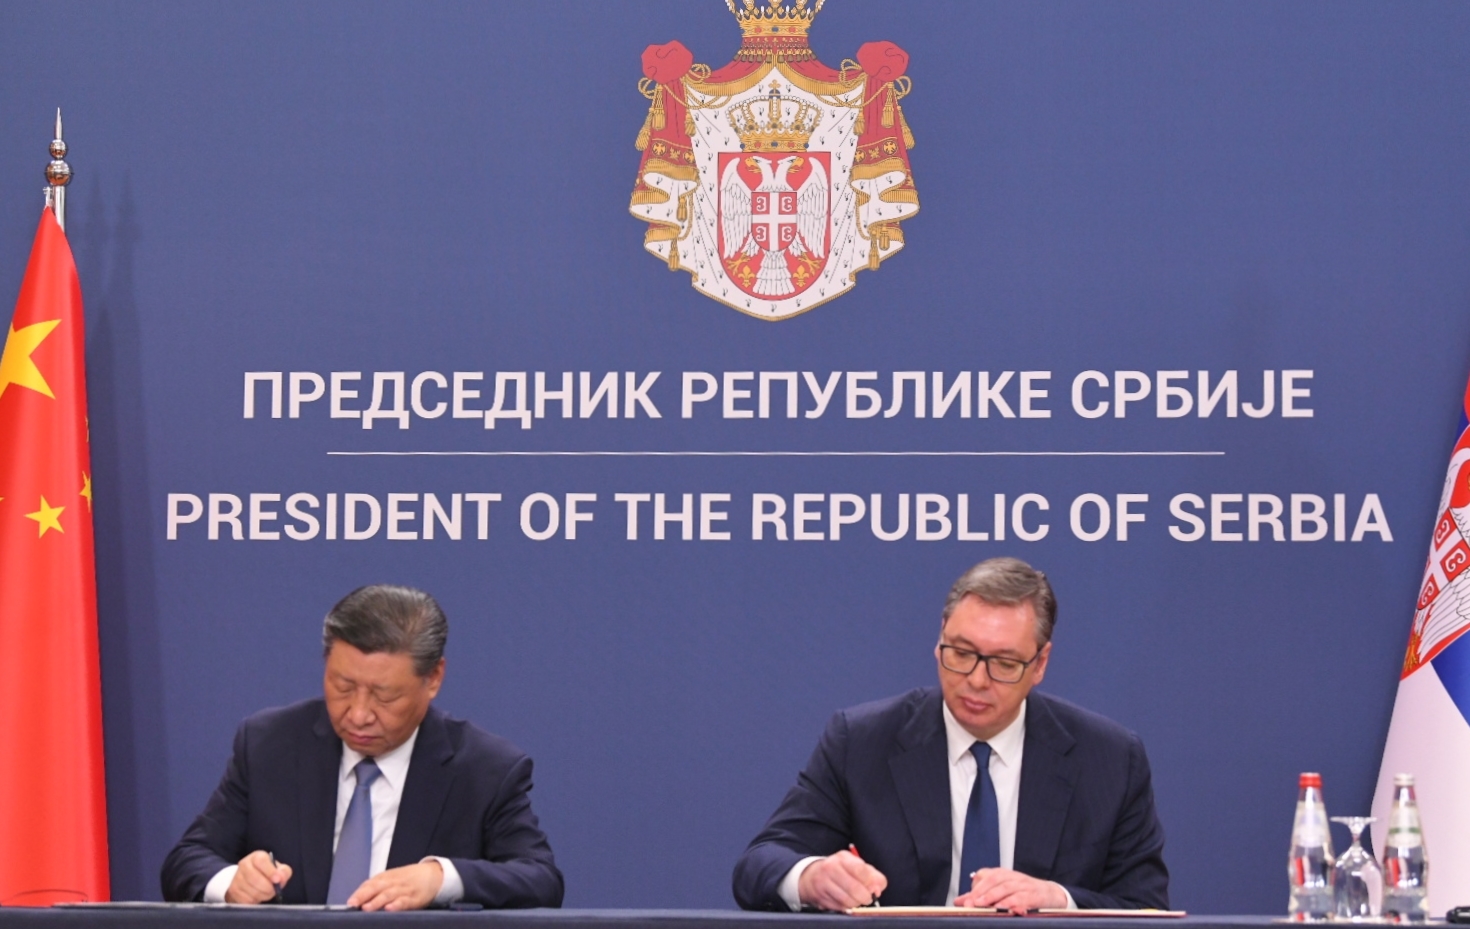 'Shared future’: China's Xi Jinping strengthens ties with Serbia, signs joint agreement